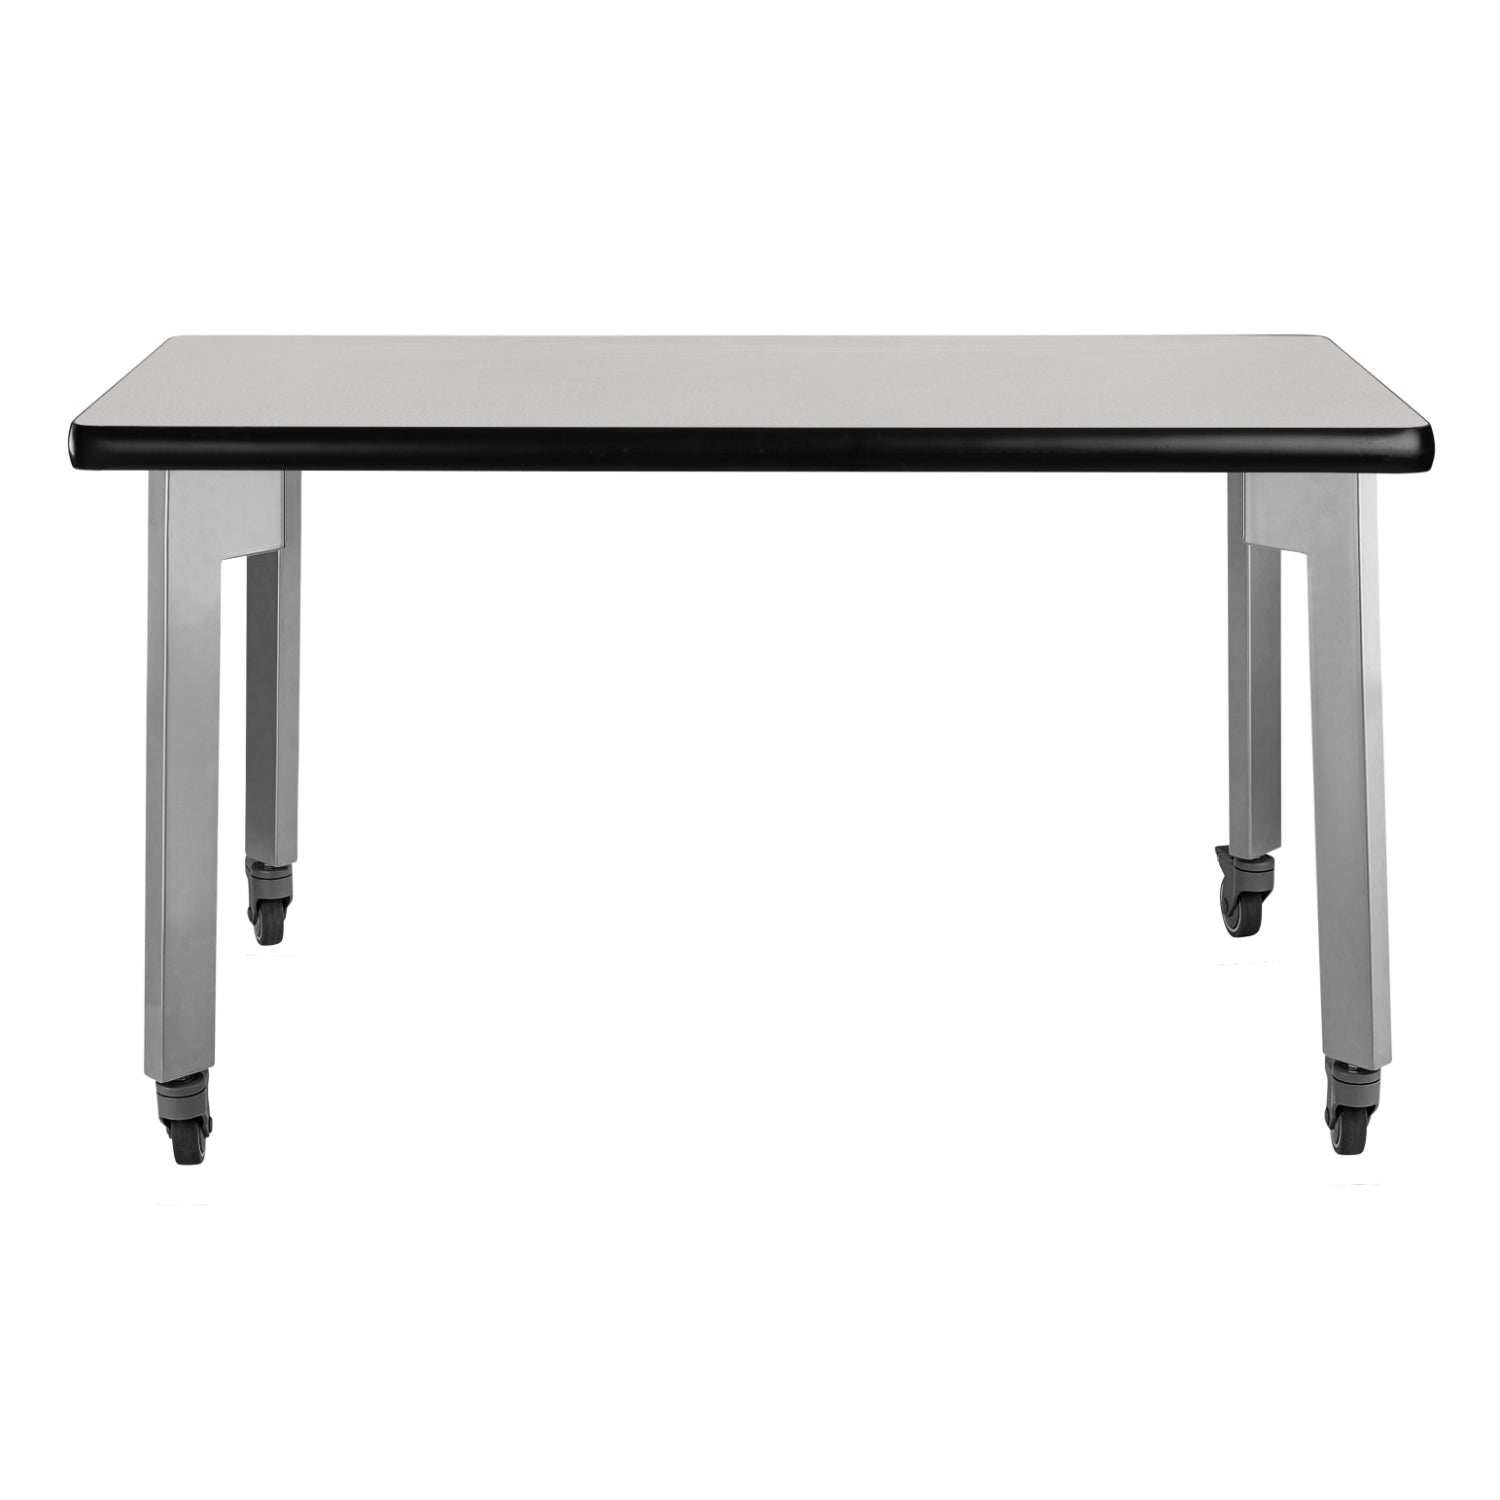 Titan Mobile Table, 30" x 48", Standard High Pressure Laminate Top with Particleboard Core and T-Mold Edge